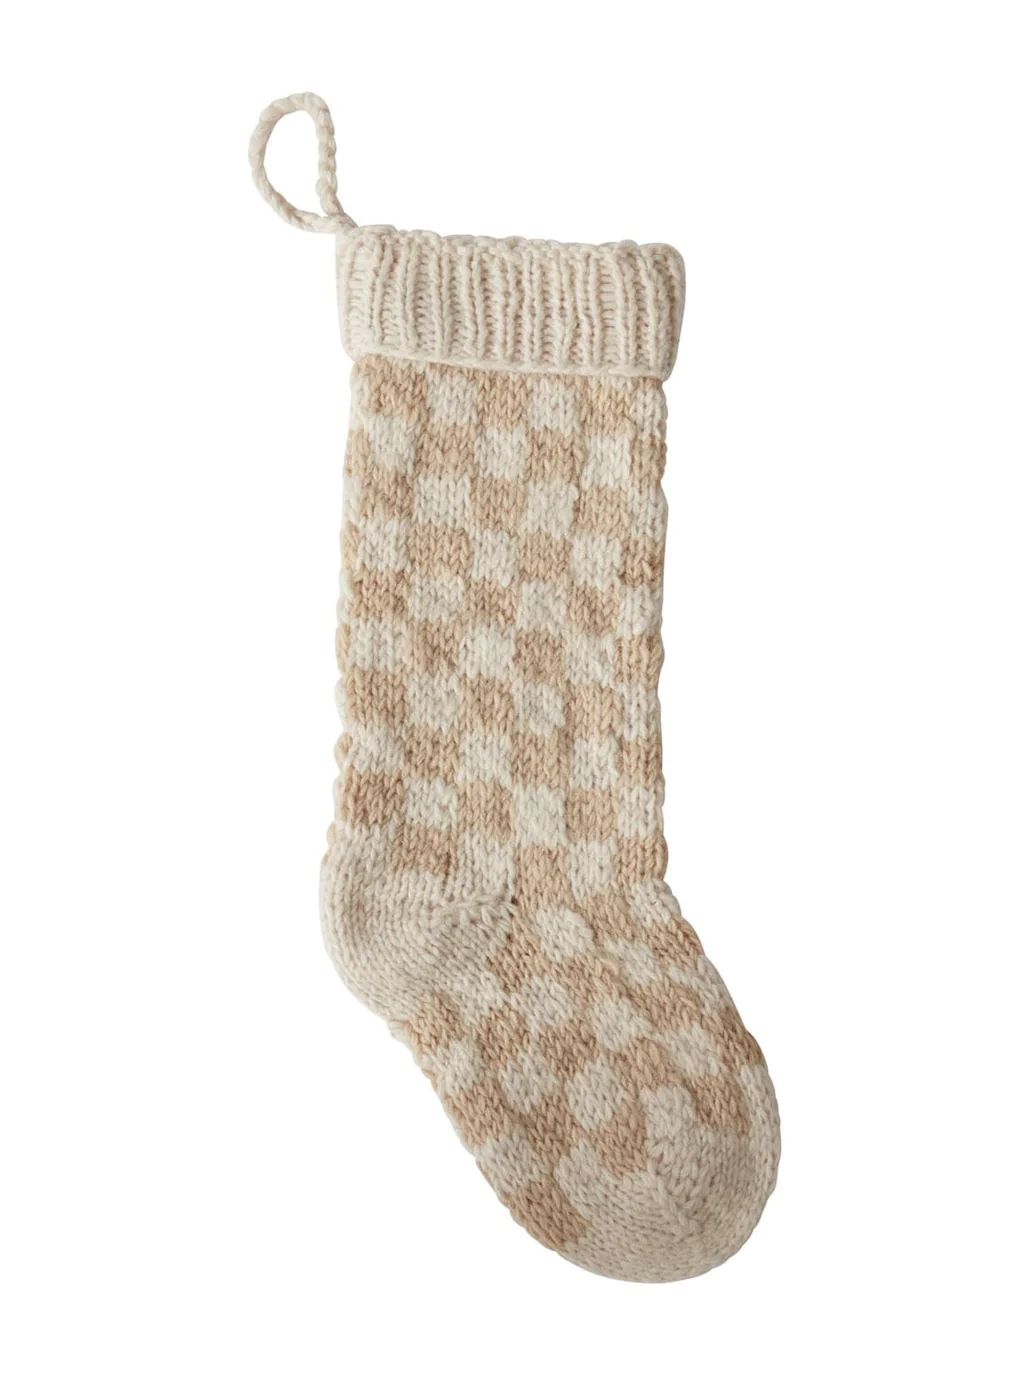 Checkered Knit Stocking | House of Jade Home